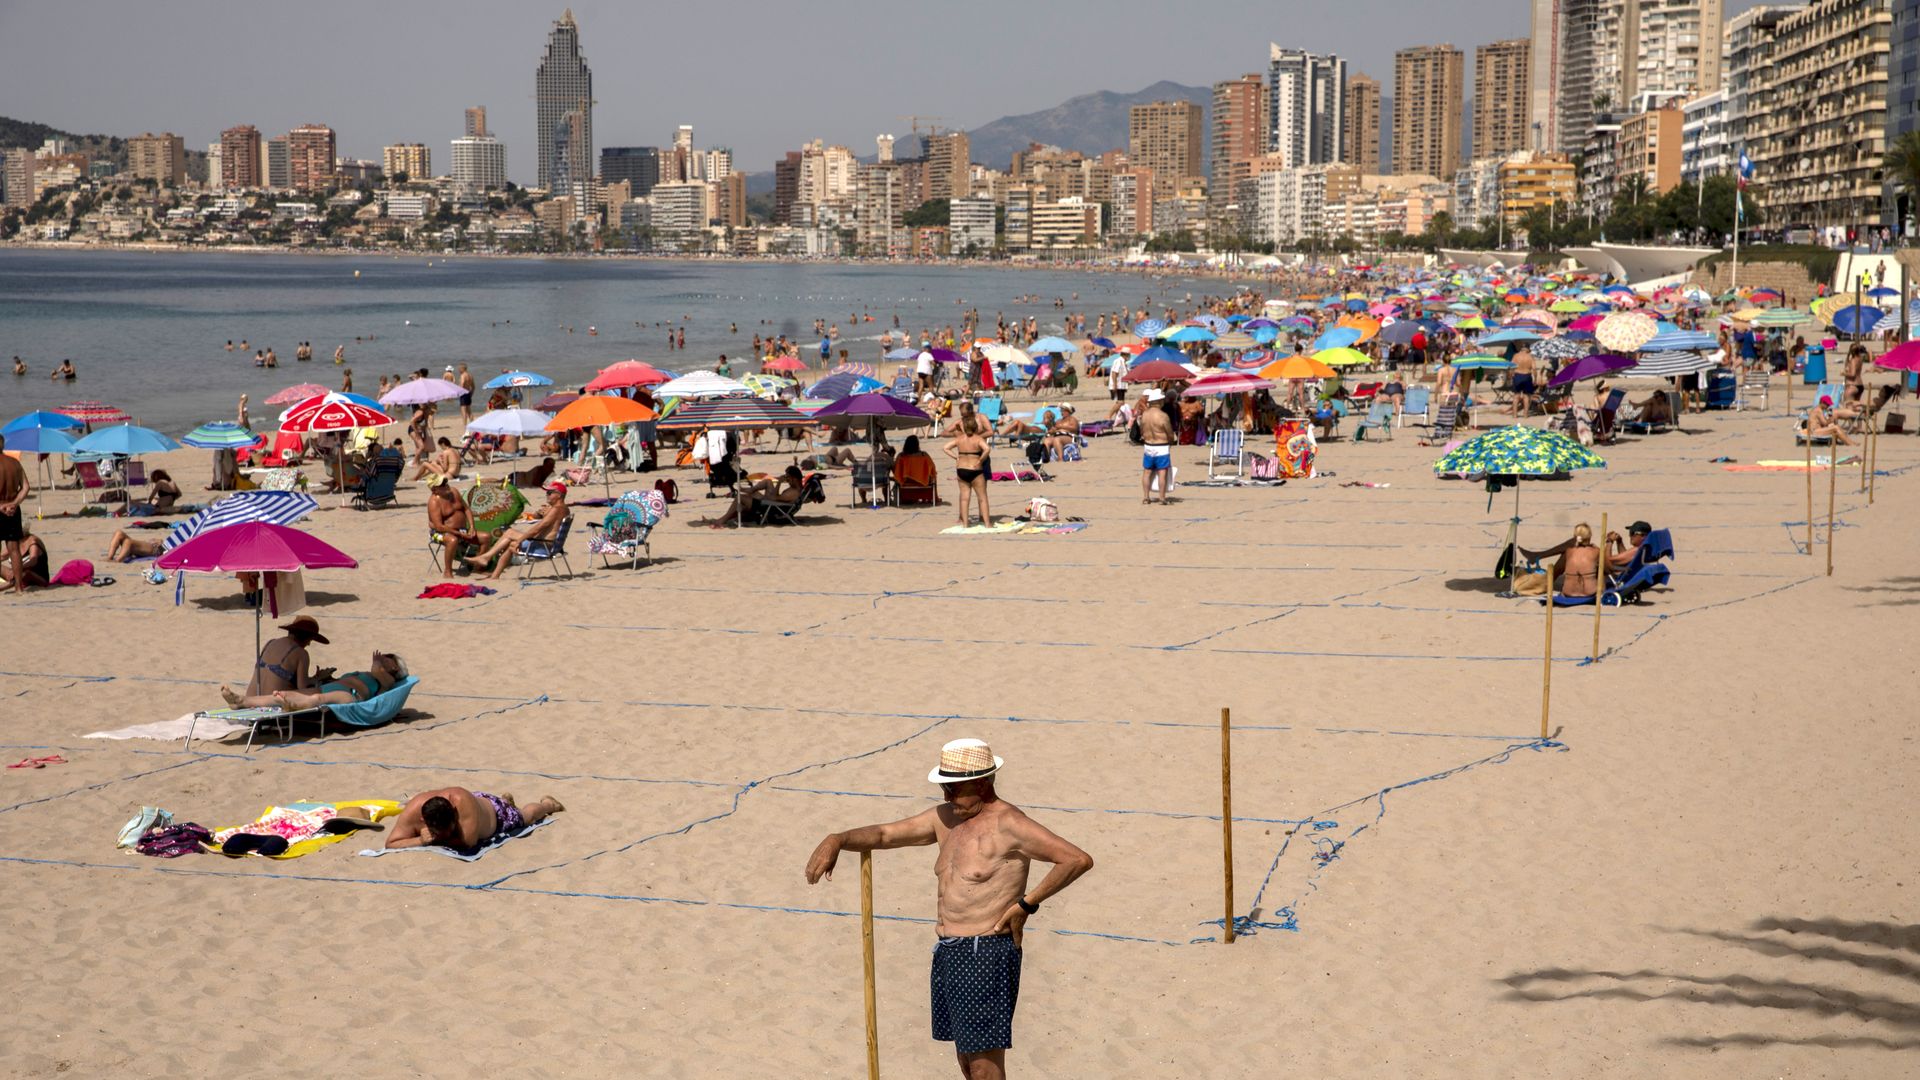 A man stands on a crowded beach.